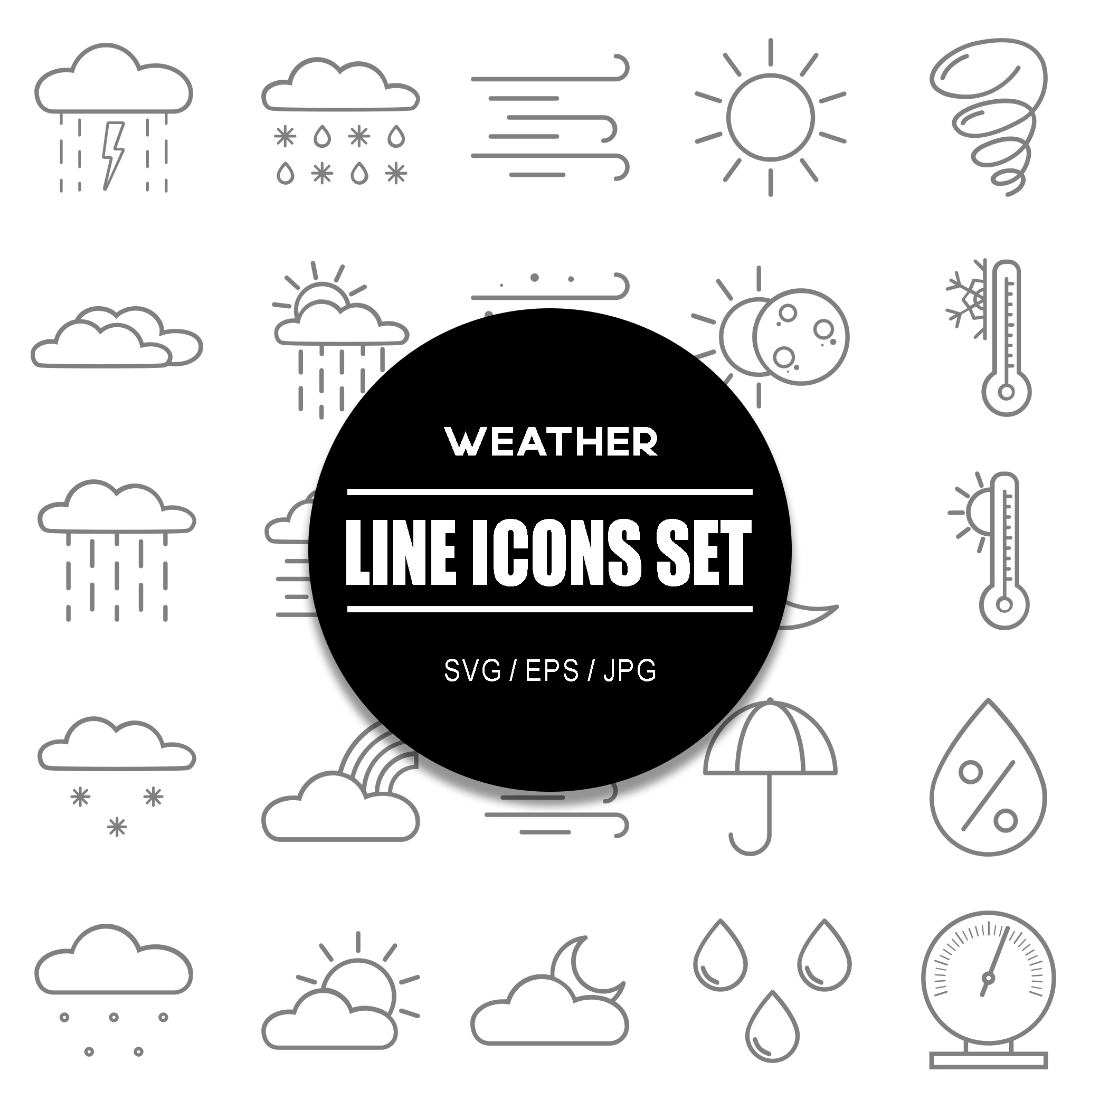 Weather Line icon Set cover image.